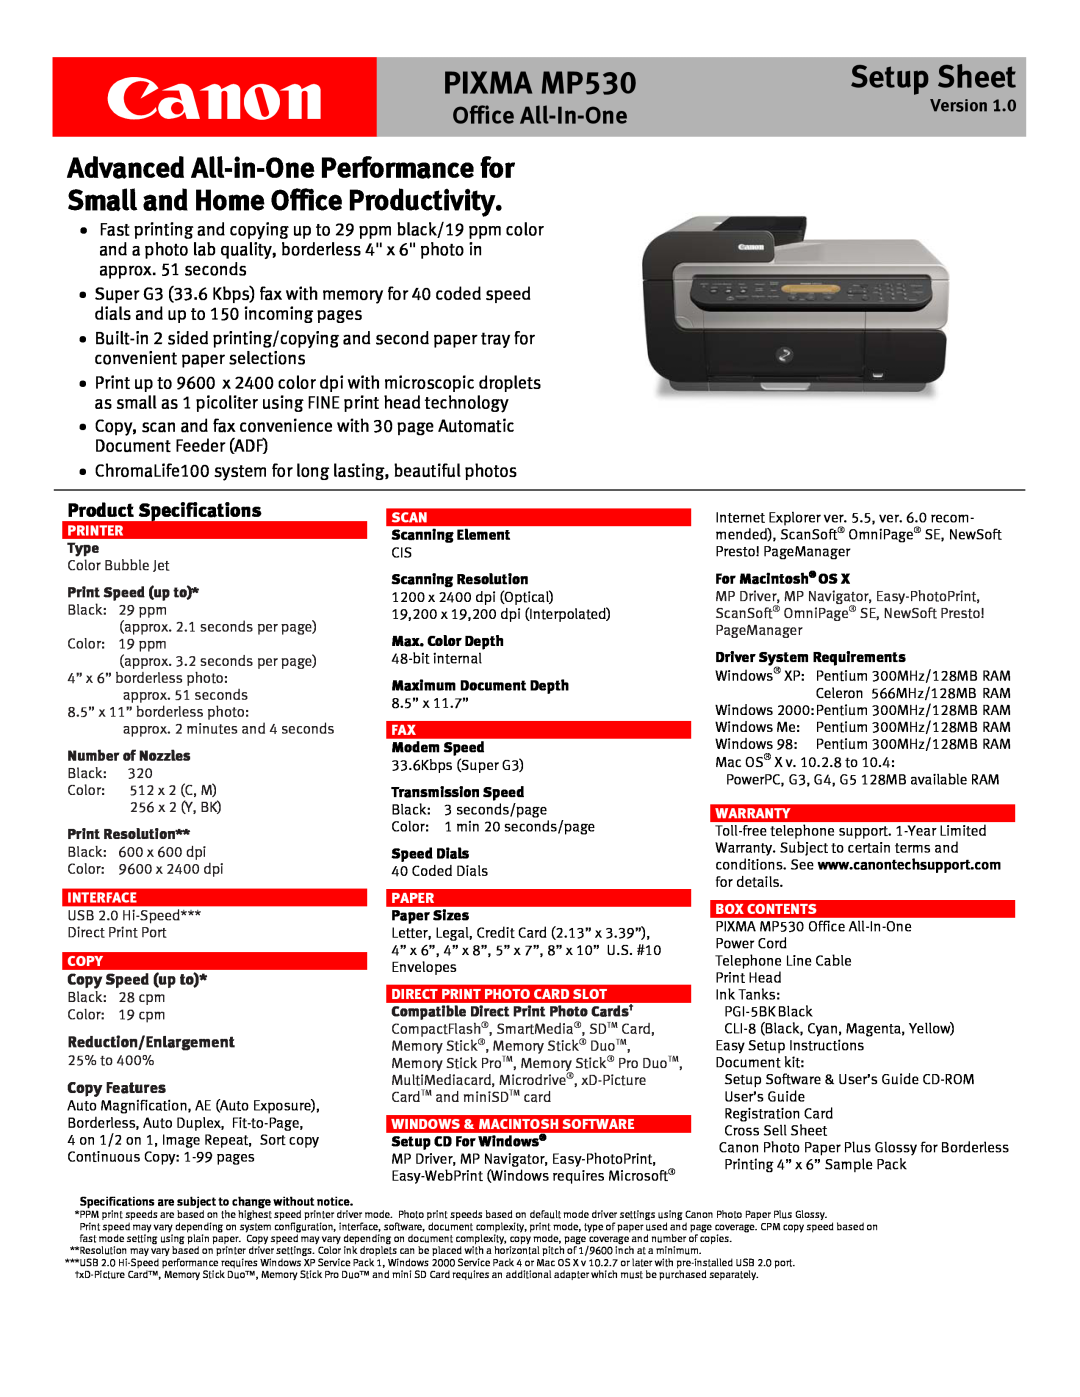 Canon specifications Setup Sheet, Product Specifications, Canon, PIXMA MP530, Office All-In-One, Version 